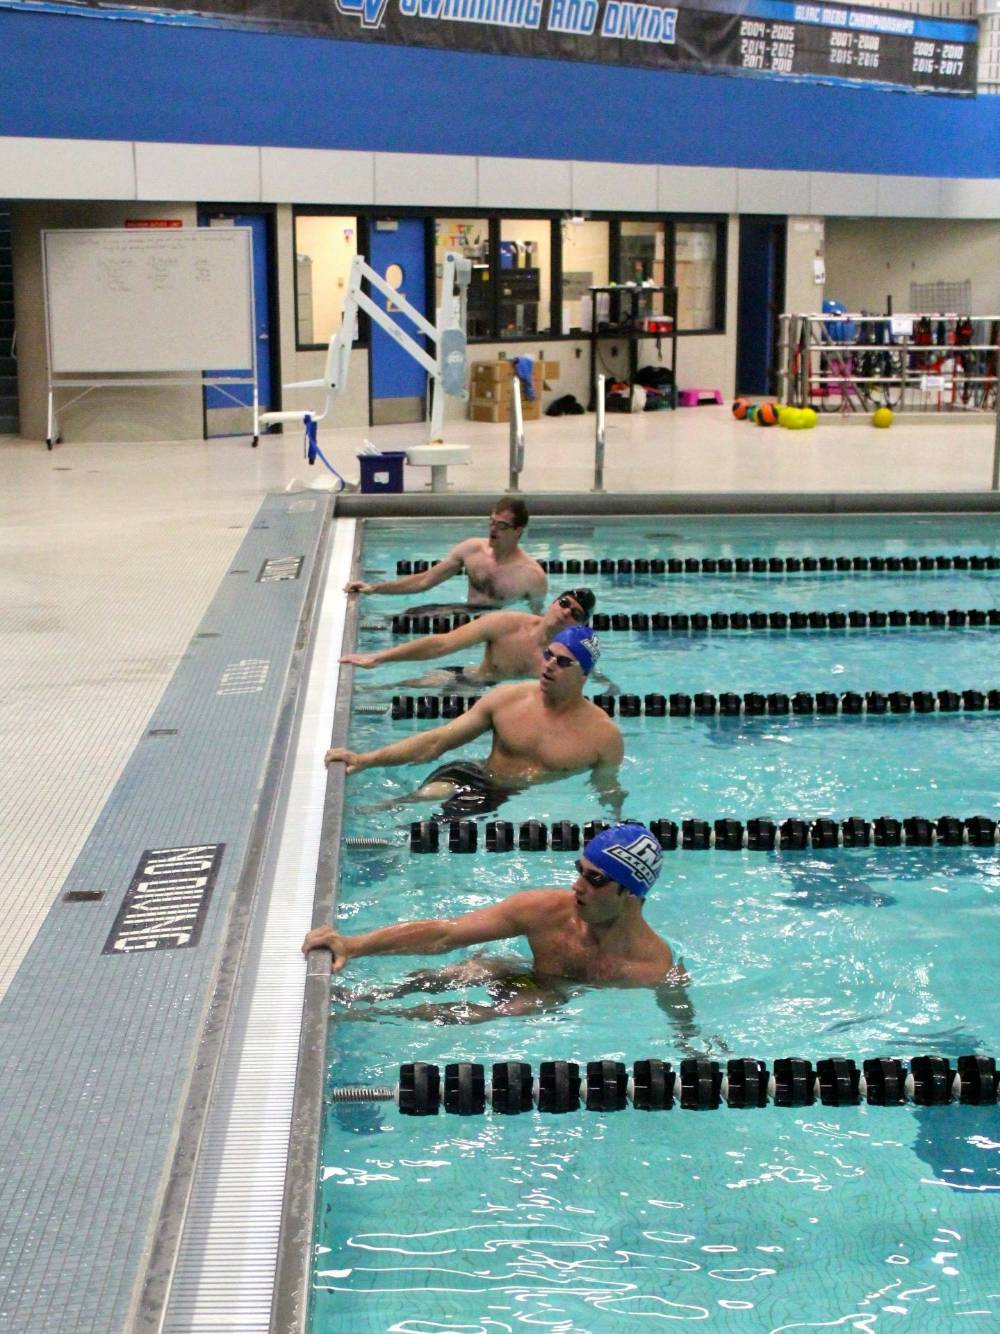 Swimmers in the pool about to take off